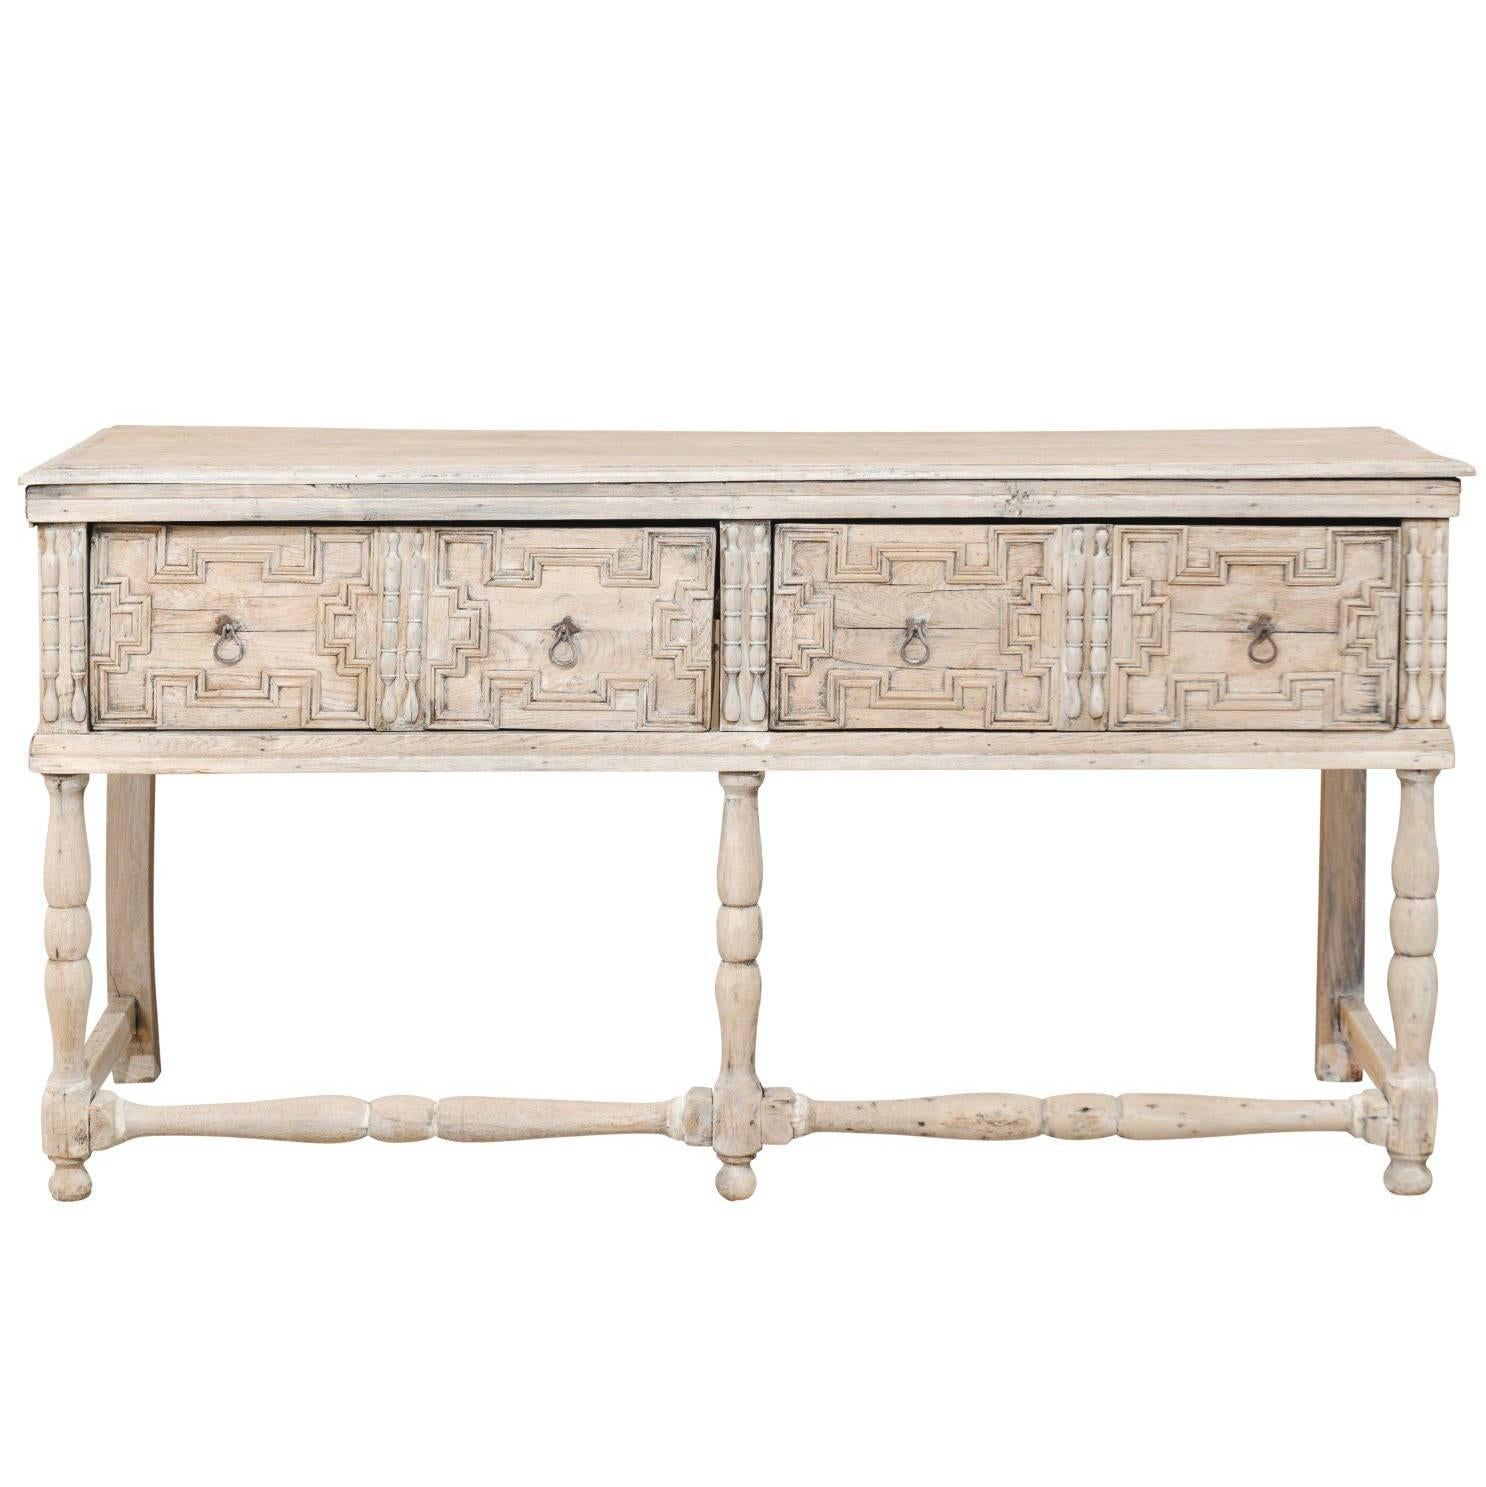 English 18th Century Console Table in Bone, Grey & White with Geometric Pattern